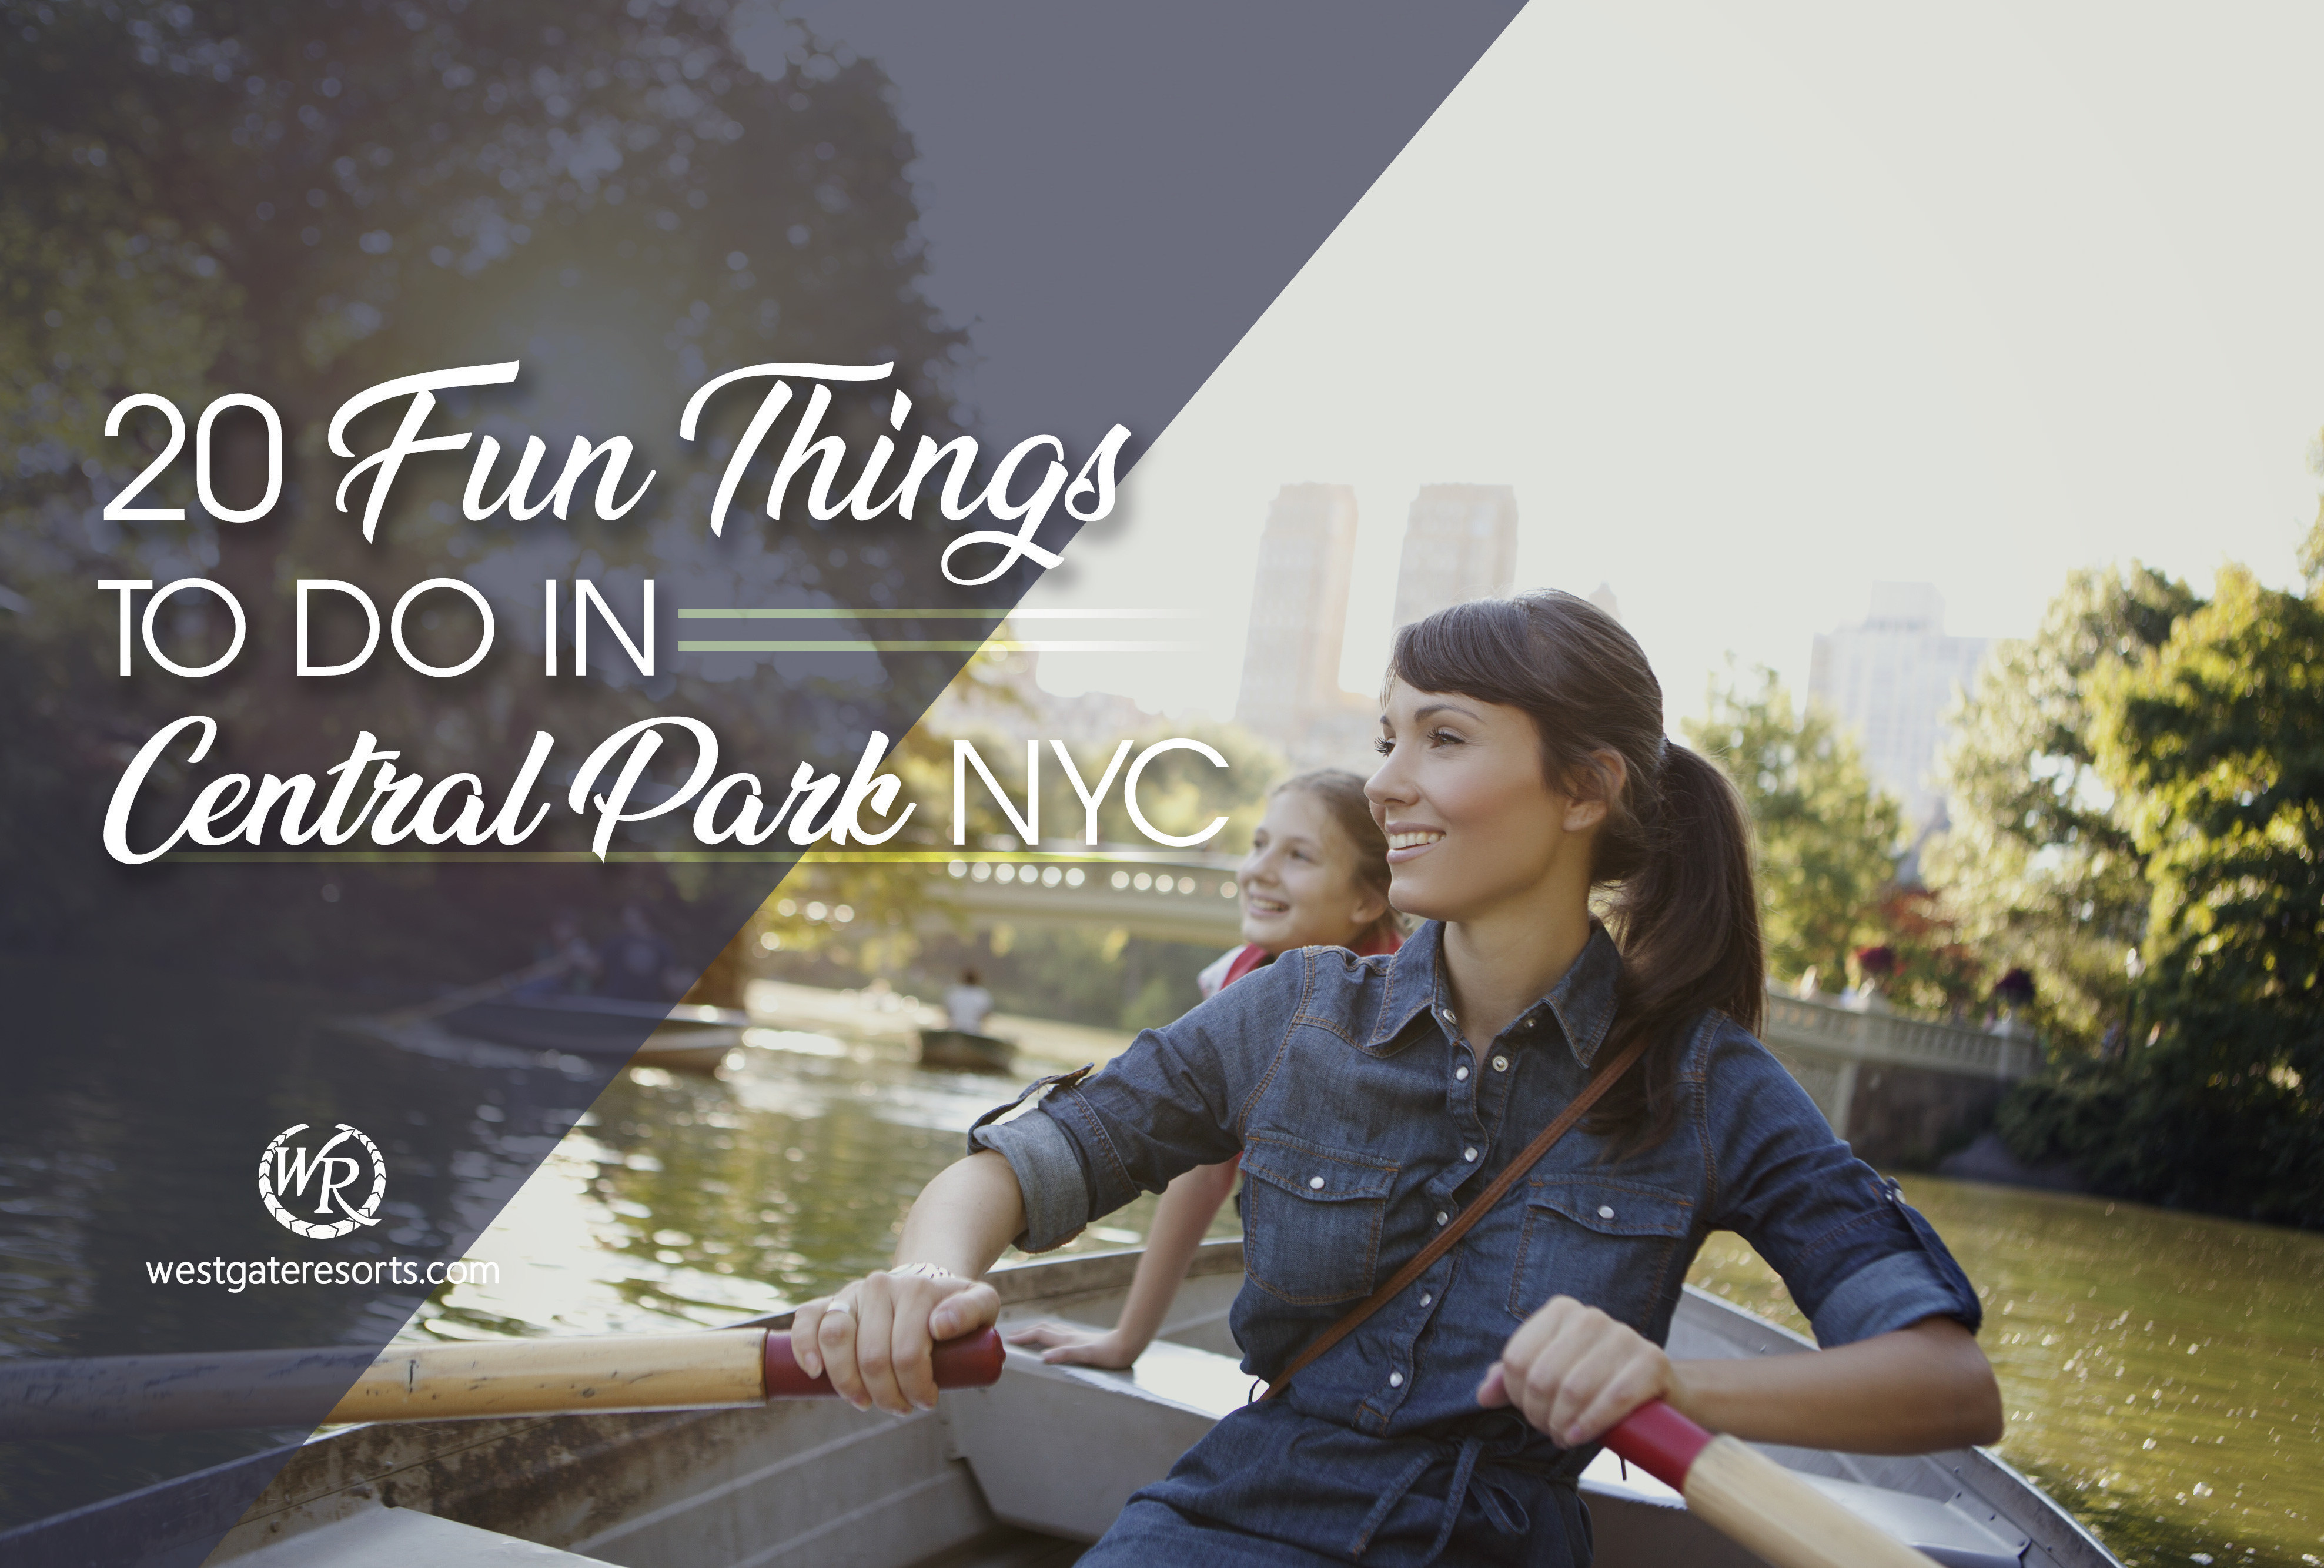 The Mall, Bethesda Terrace & the Loeb Boathouse in New York City -  Attraction